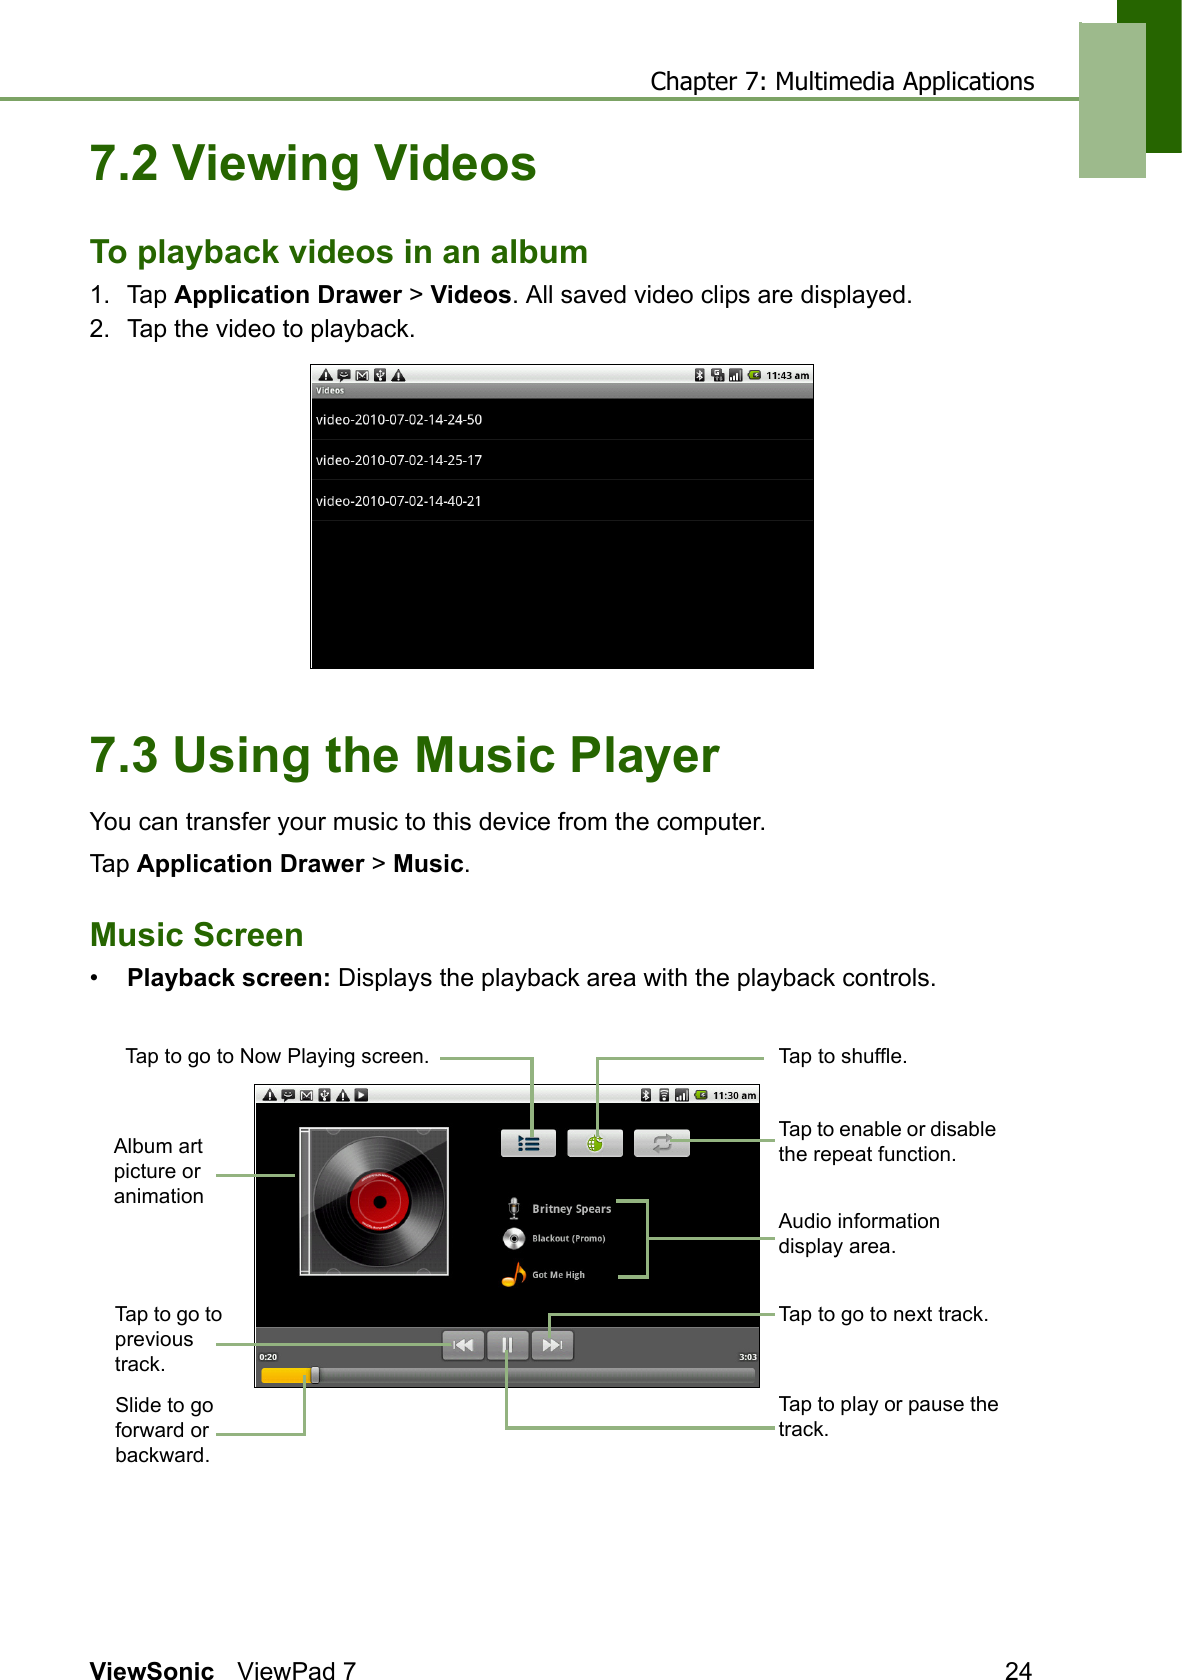 Chapter 7: Multimedia ApplicationsViewSonic ViewPad 7 247.2 Viewing VideosTo playback videos in an album1. Tap Application Drawer &gt; Videos. All saved video clips are displayed.2. Tap the video to playback. 7.3 Using the Music PlayerYou can transfer your music to this device from the computer.Tap Application Drawer &gt; Music.Music Screen•Playback screen: Displays the playback area with the playback controls.Album art picture or animationAudio information display area.Tap to go to Now Playing screen.Tap to enable or disable the repeat function.Tap to go to next track.Slide to go forward or backward.Tap to go to previous track.Tap to shuffle.Tap to play or pause the track.